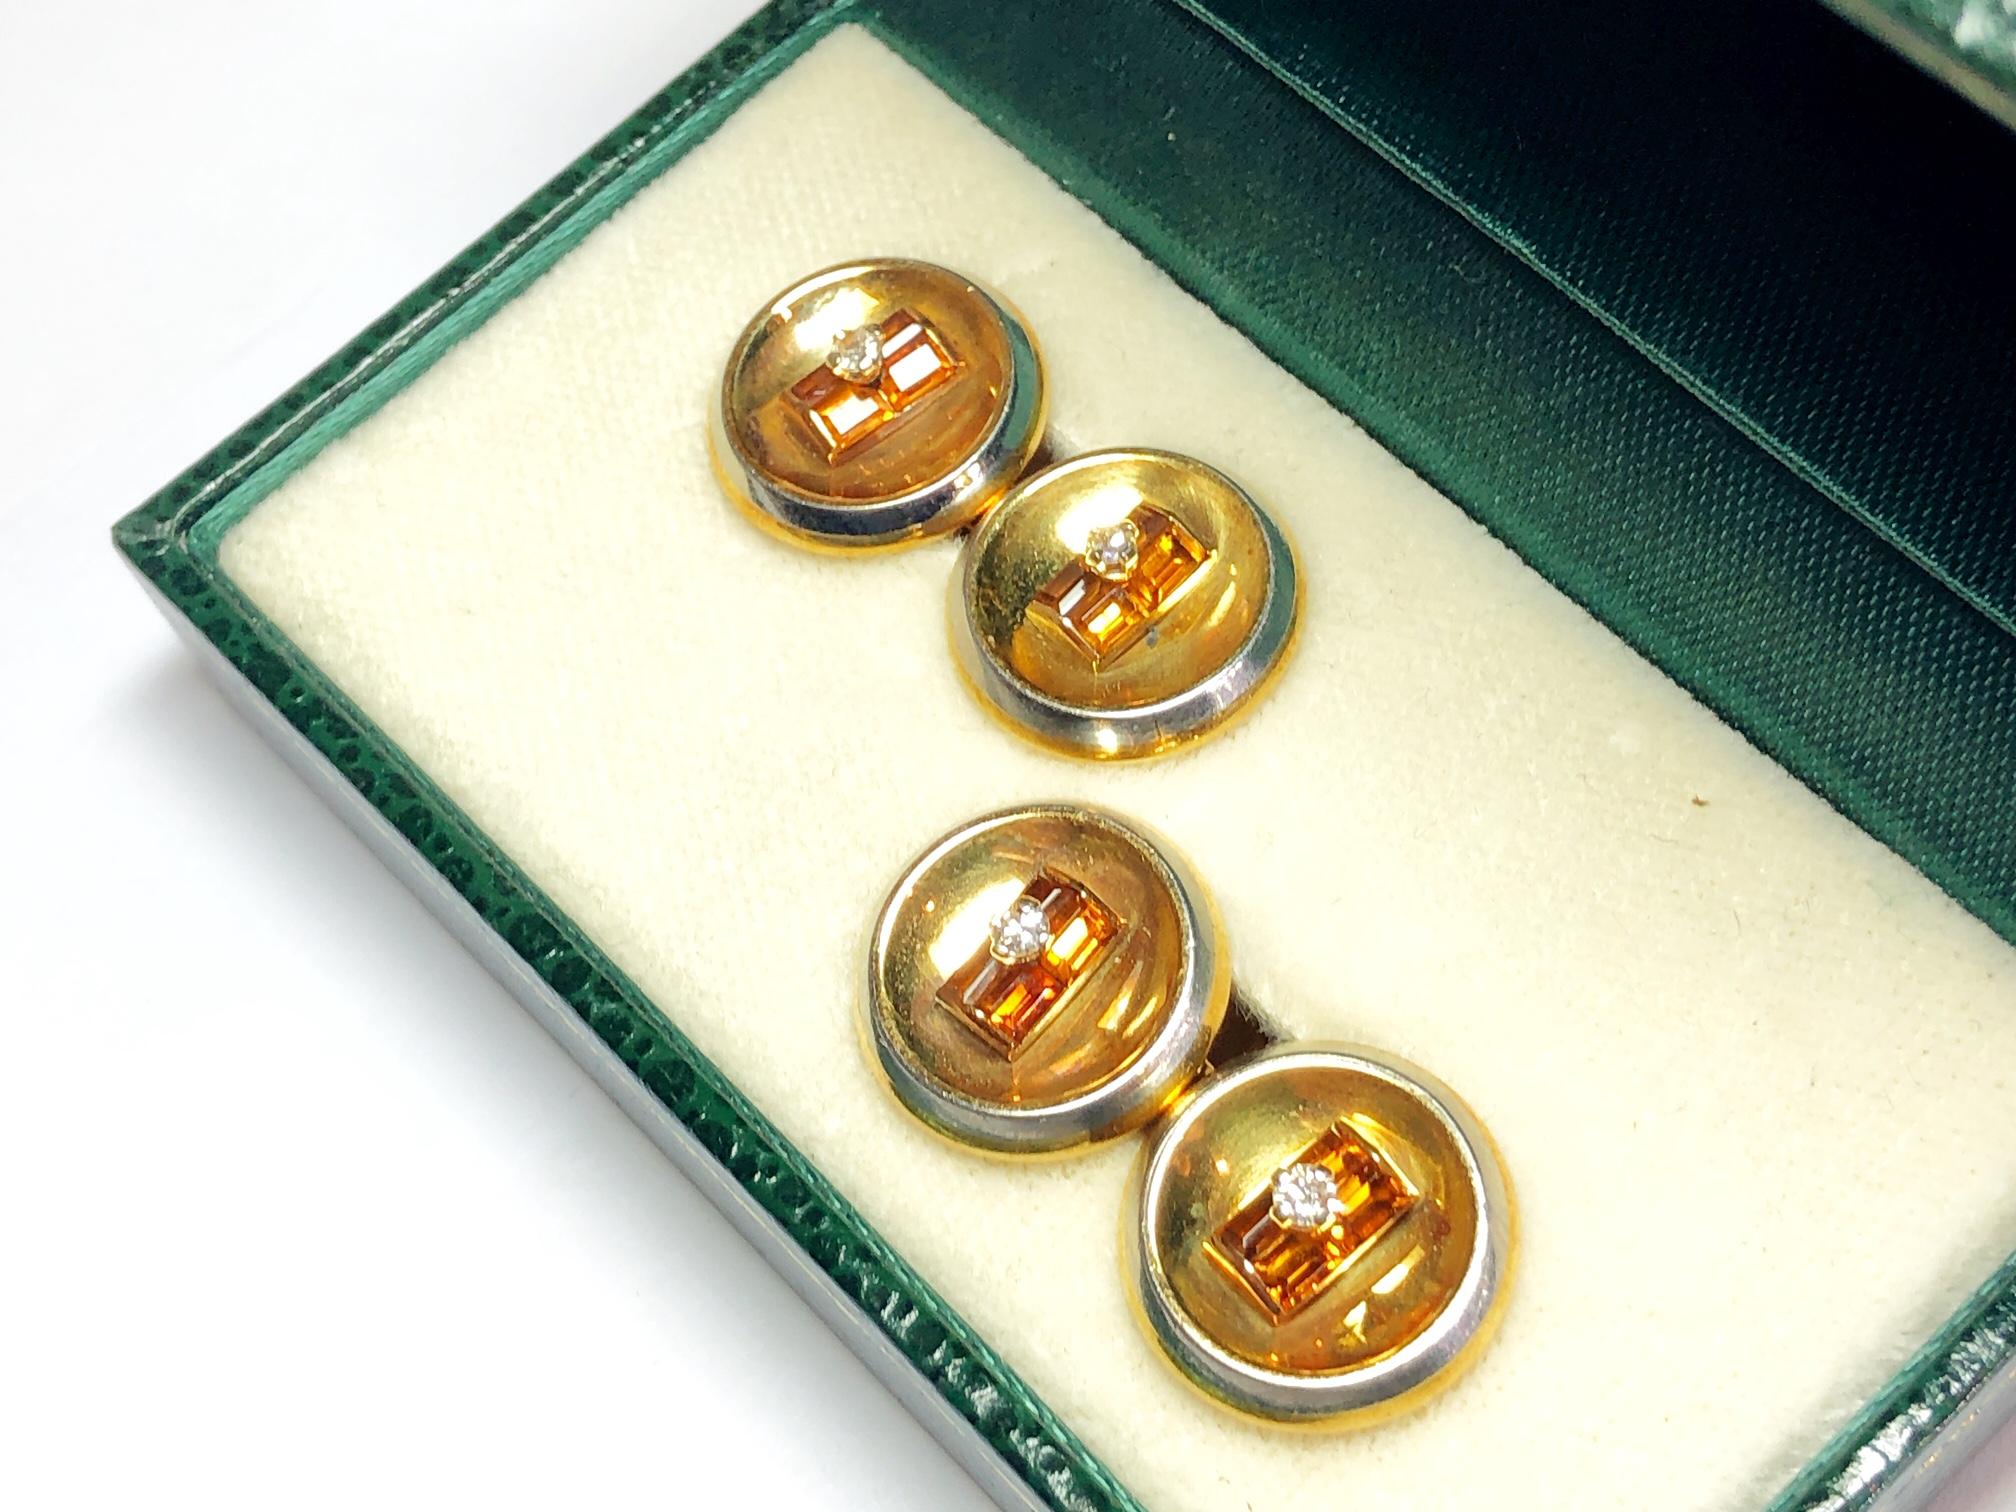 A pair of two colour gold and citrine cufflinks, mounted in 18ct yellow gold, with a white gold edge, set with four baguette-cut citrines, with an eight-cut diamond in the centre, with French eagle mark. Circa 1960.